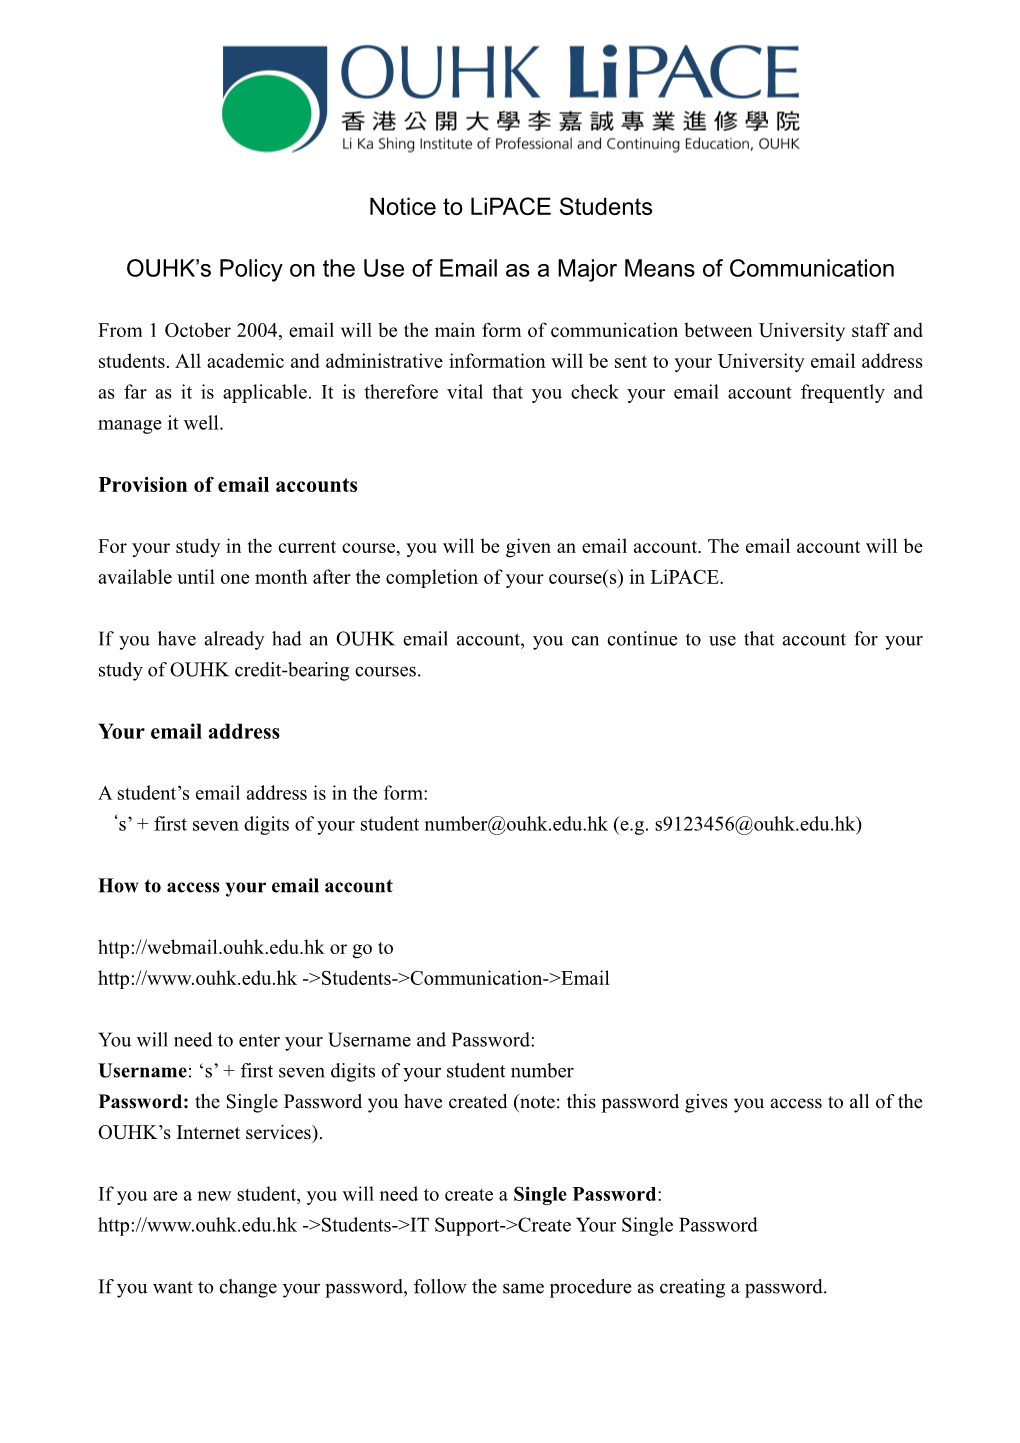 OUHK S Policy on the Use of Email As a Major Means of Communication